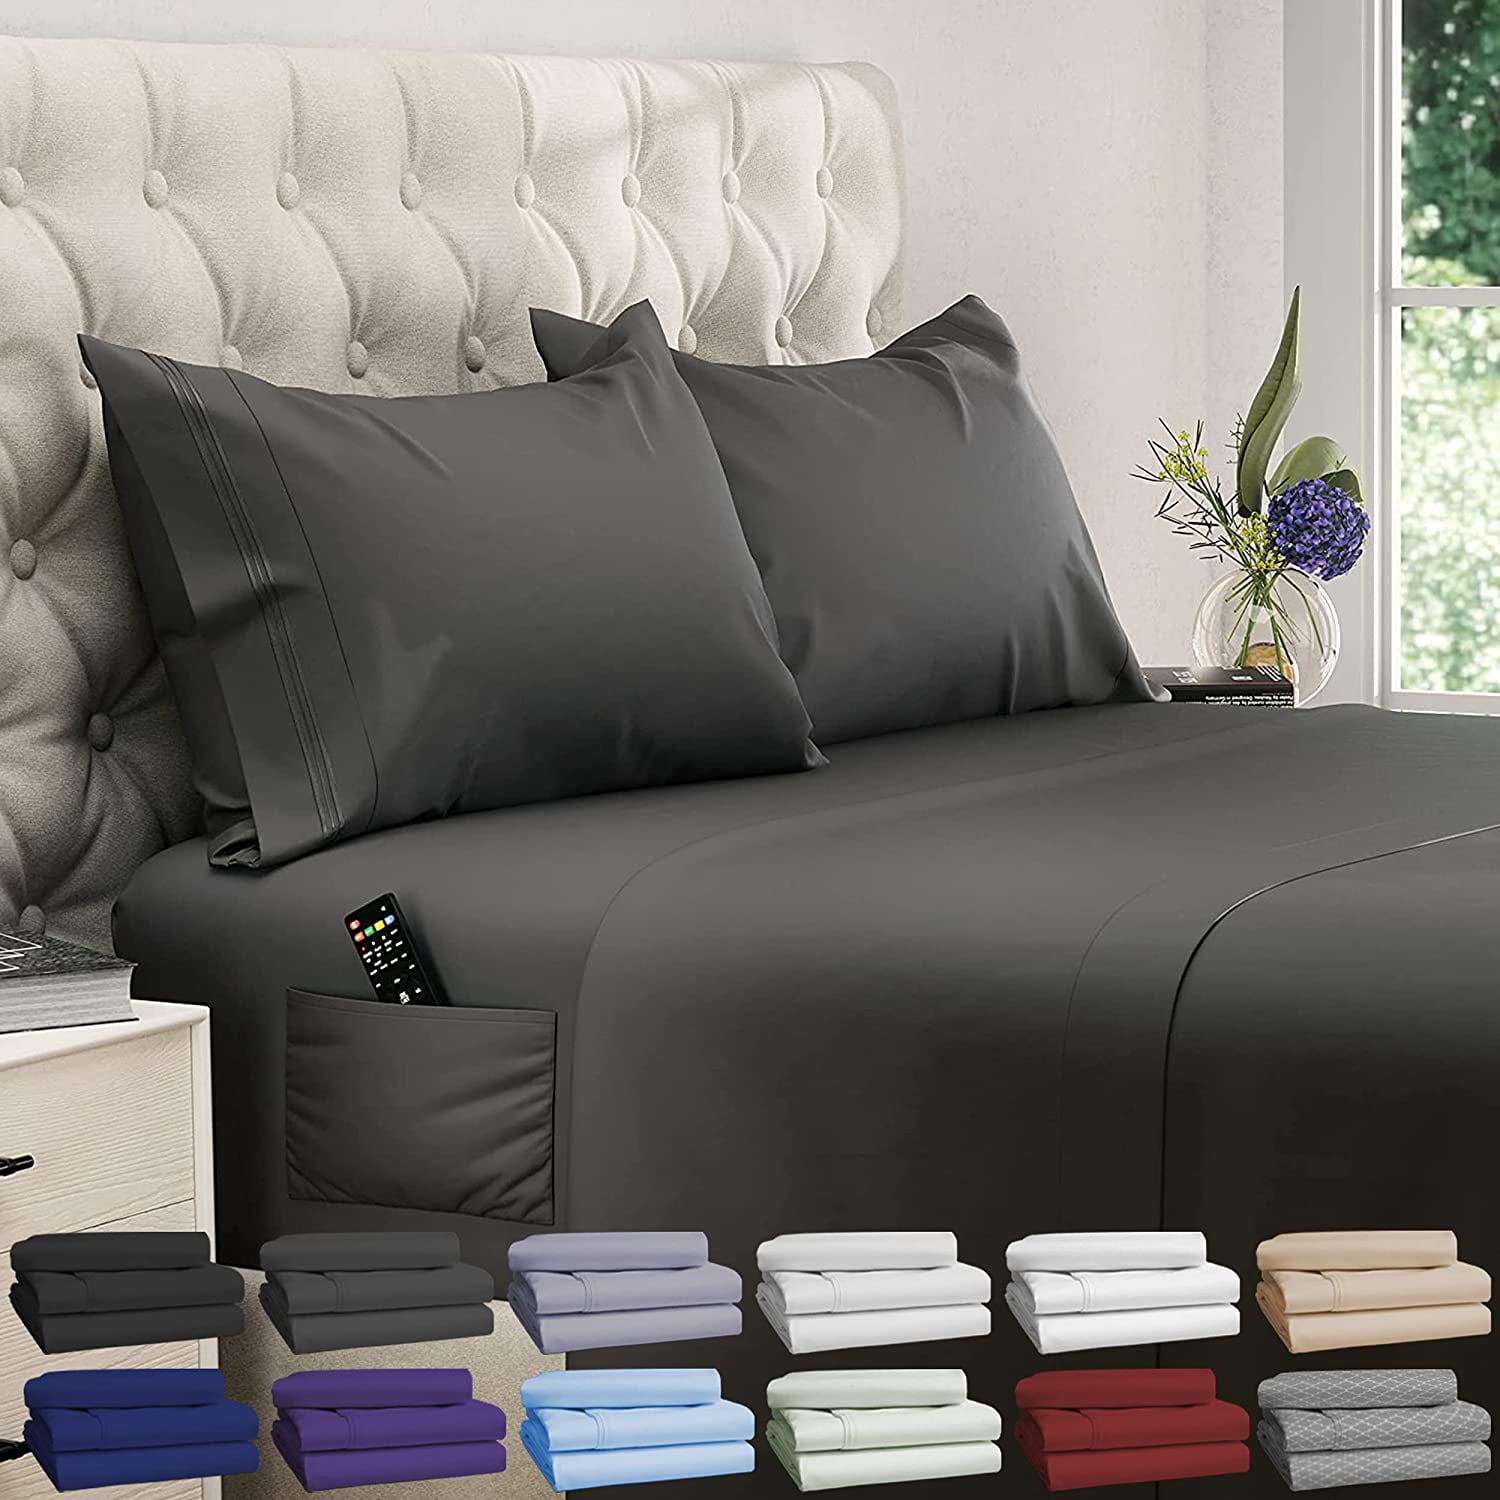 DREAMCARE - Bed Sheets Set - Queen Size Sheet with Side Pocket - 4pcs Set,  15 inches, Black 